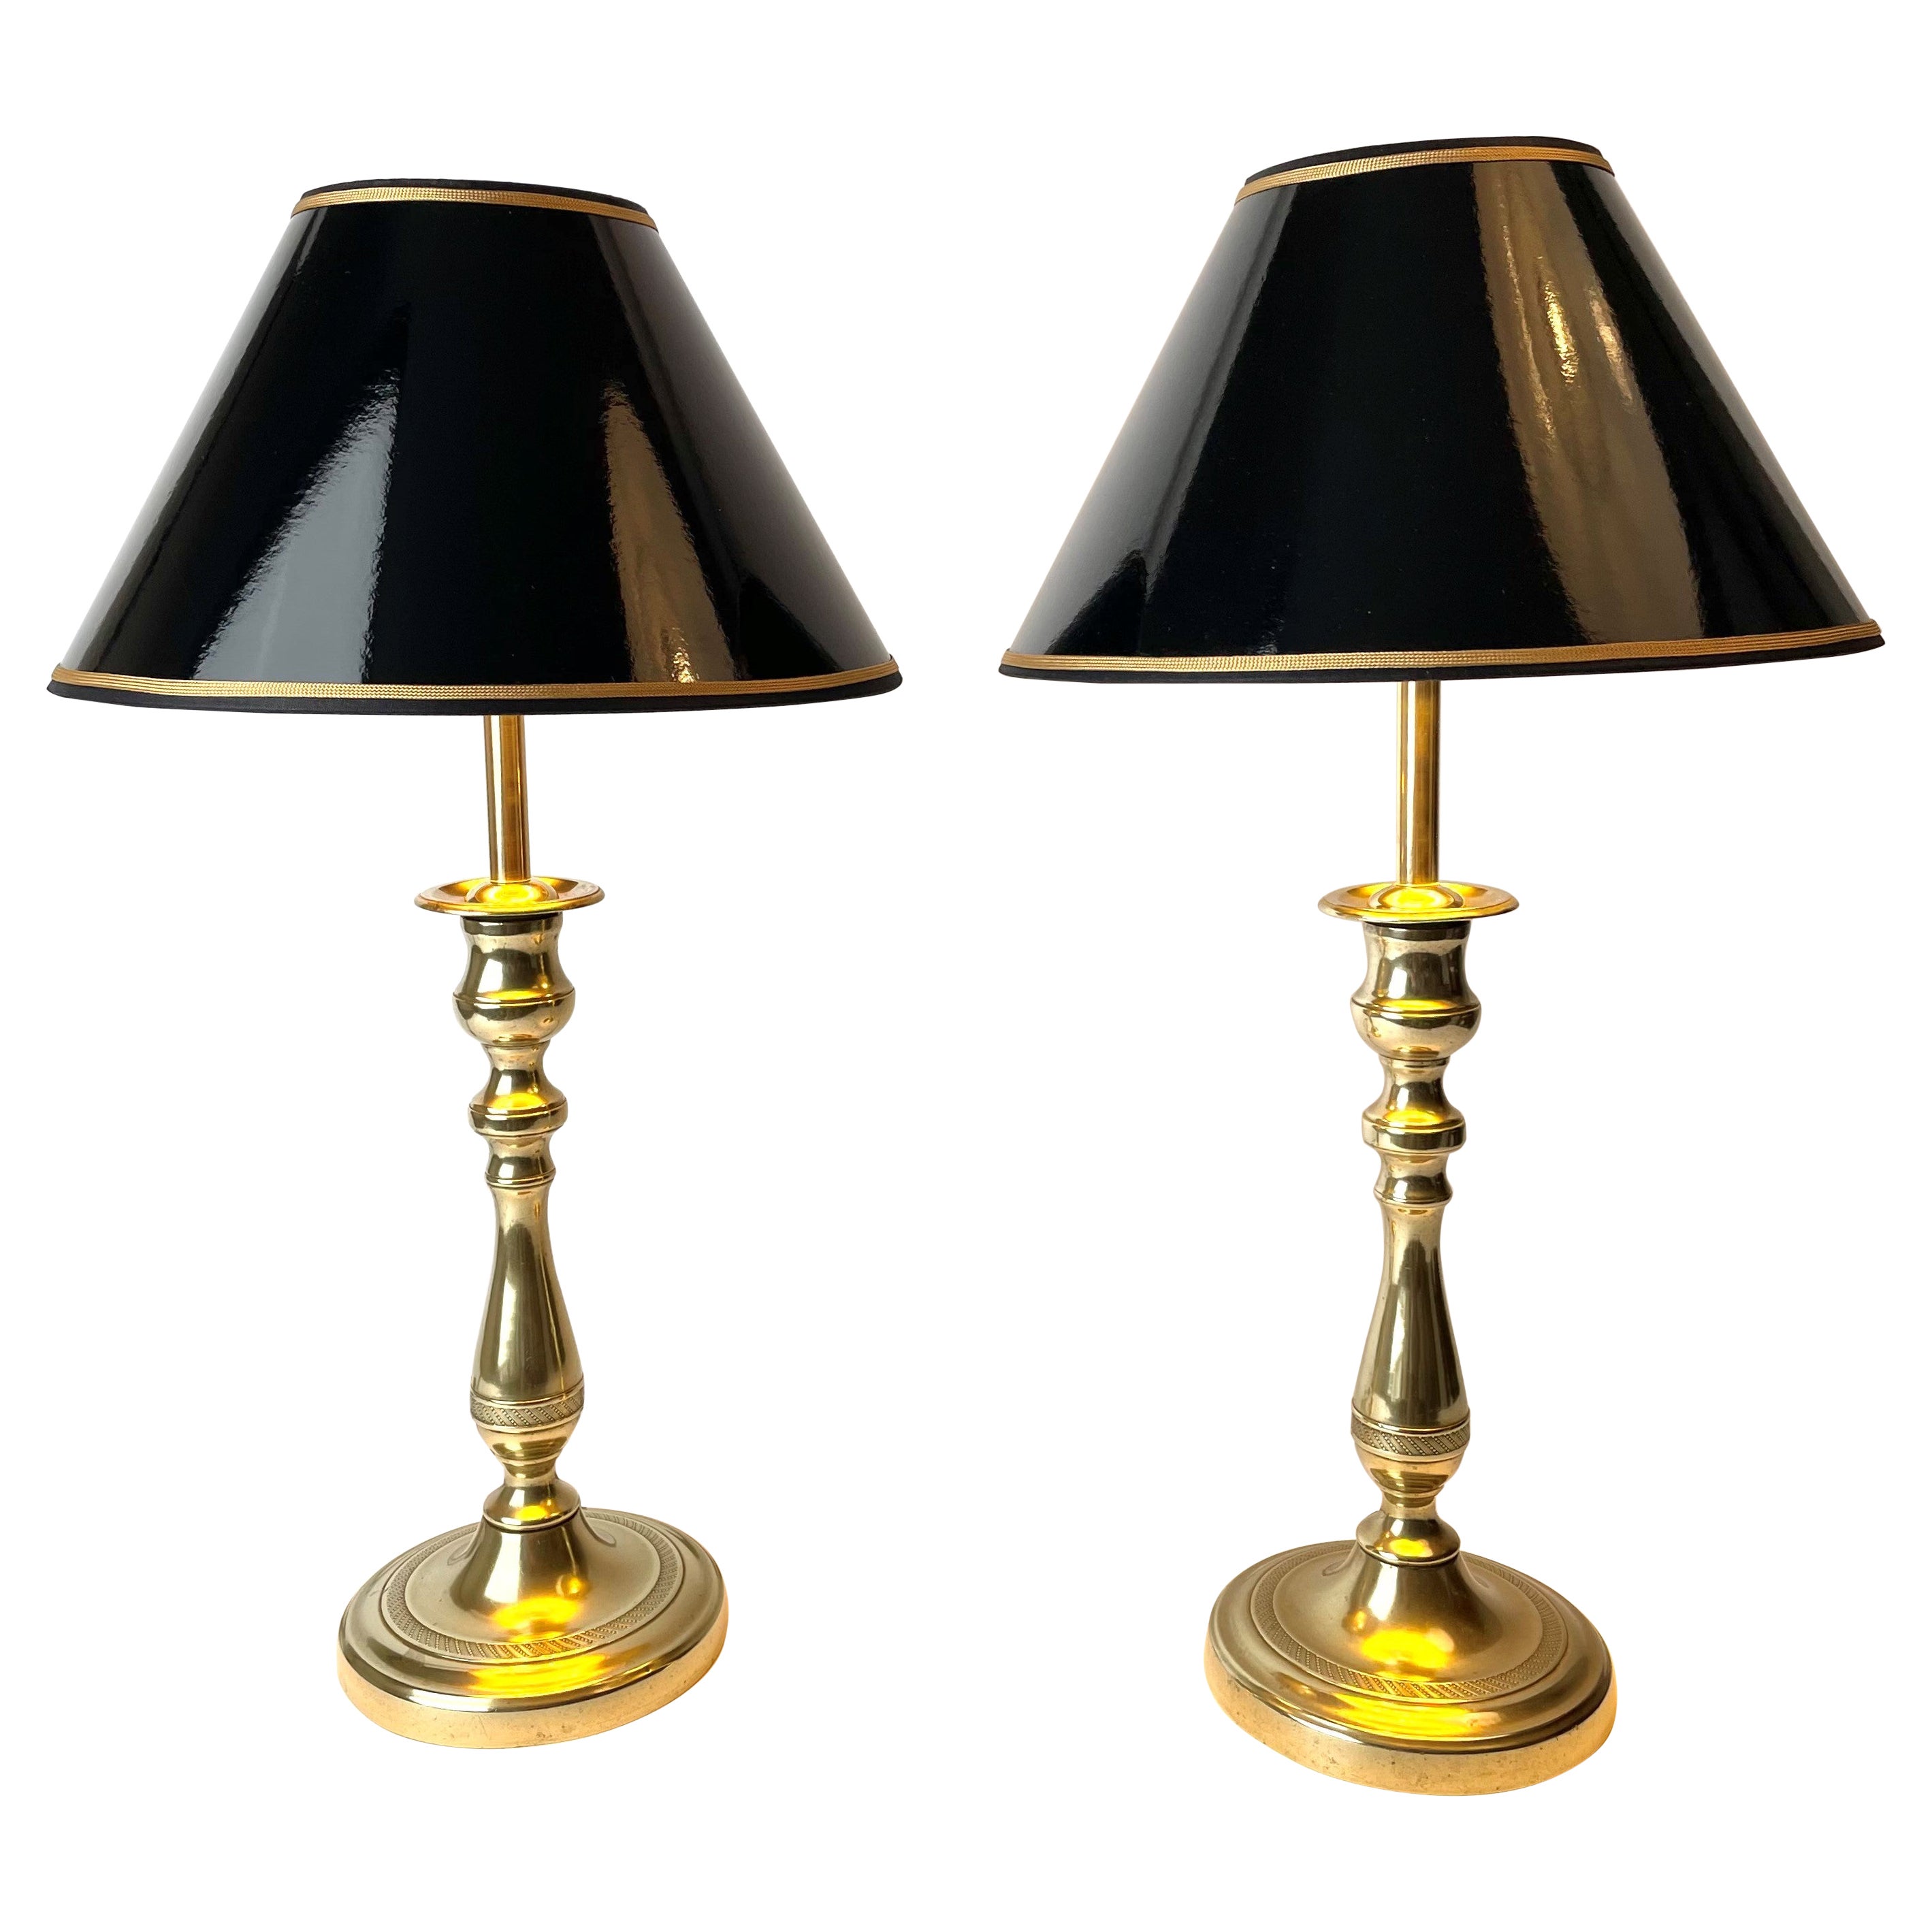 Pair of Table Lamps, Originally Empire Candlesticks